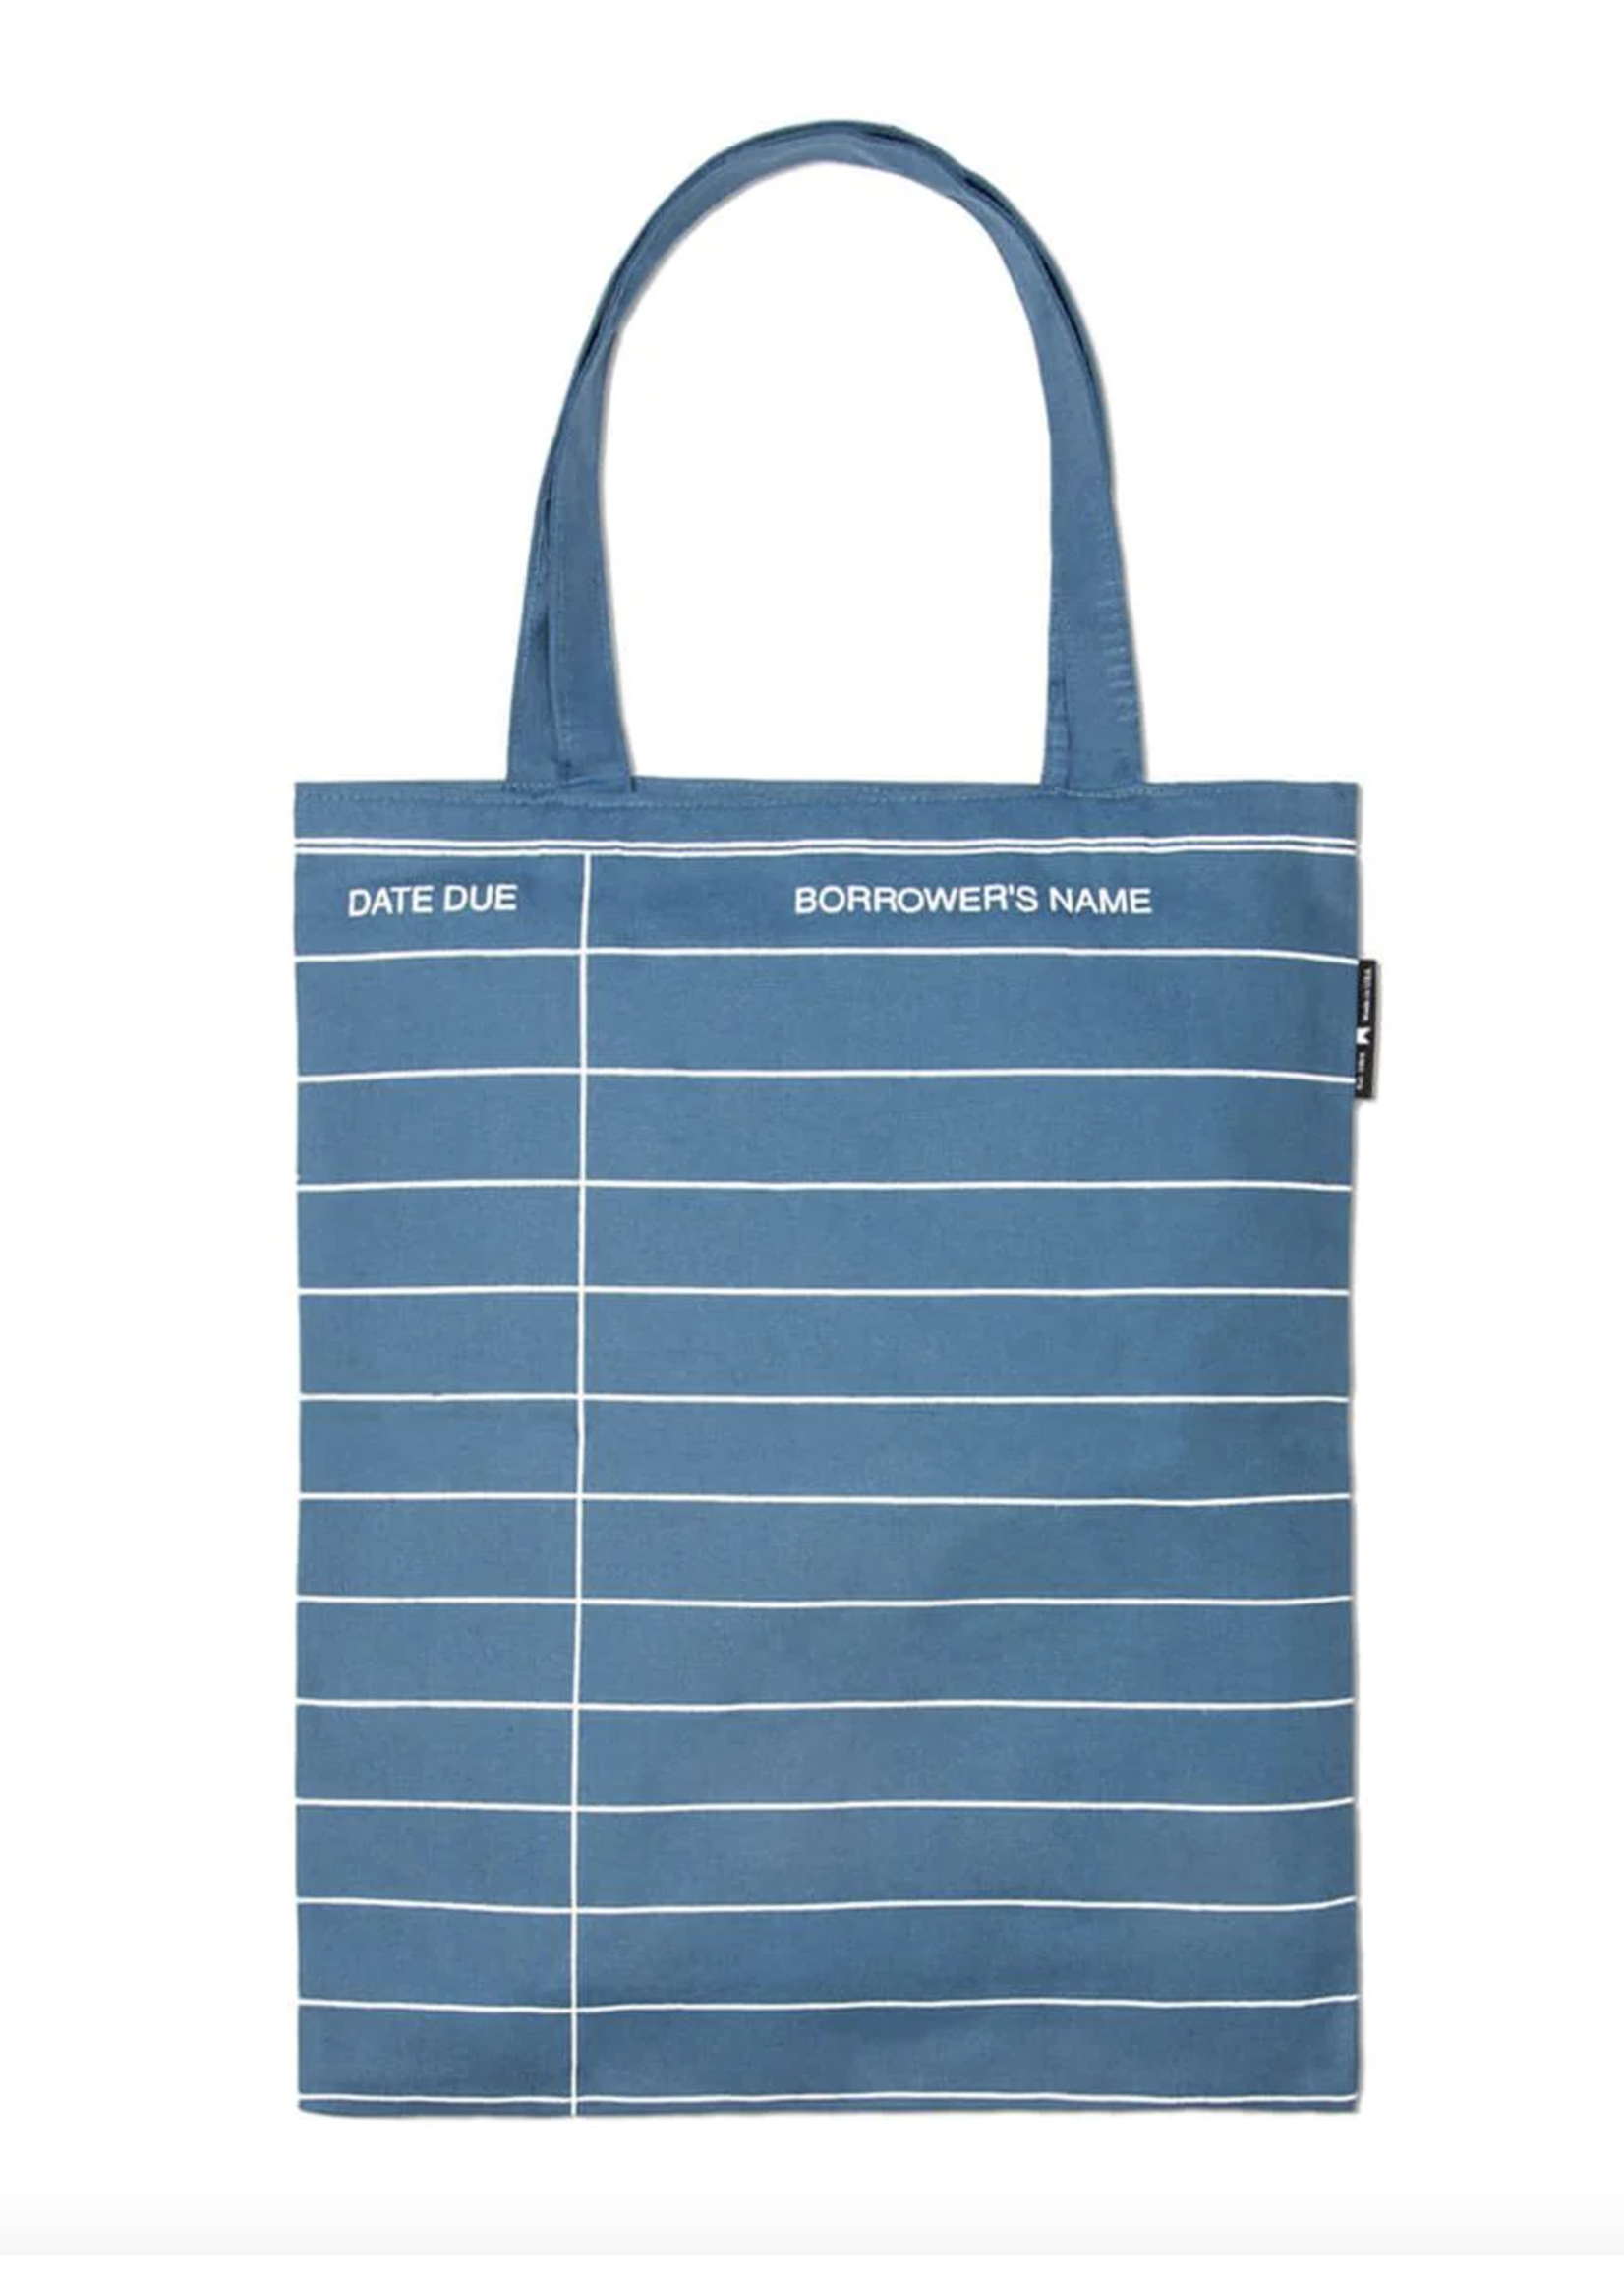 Out of Print Library Card Denim Tote